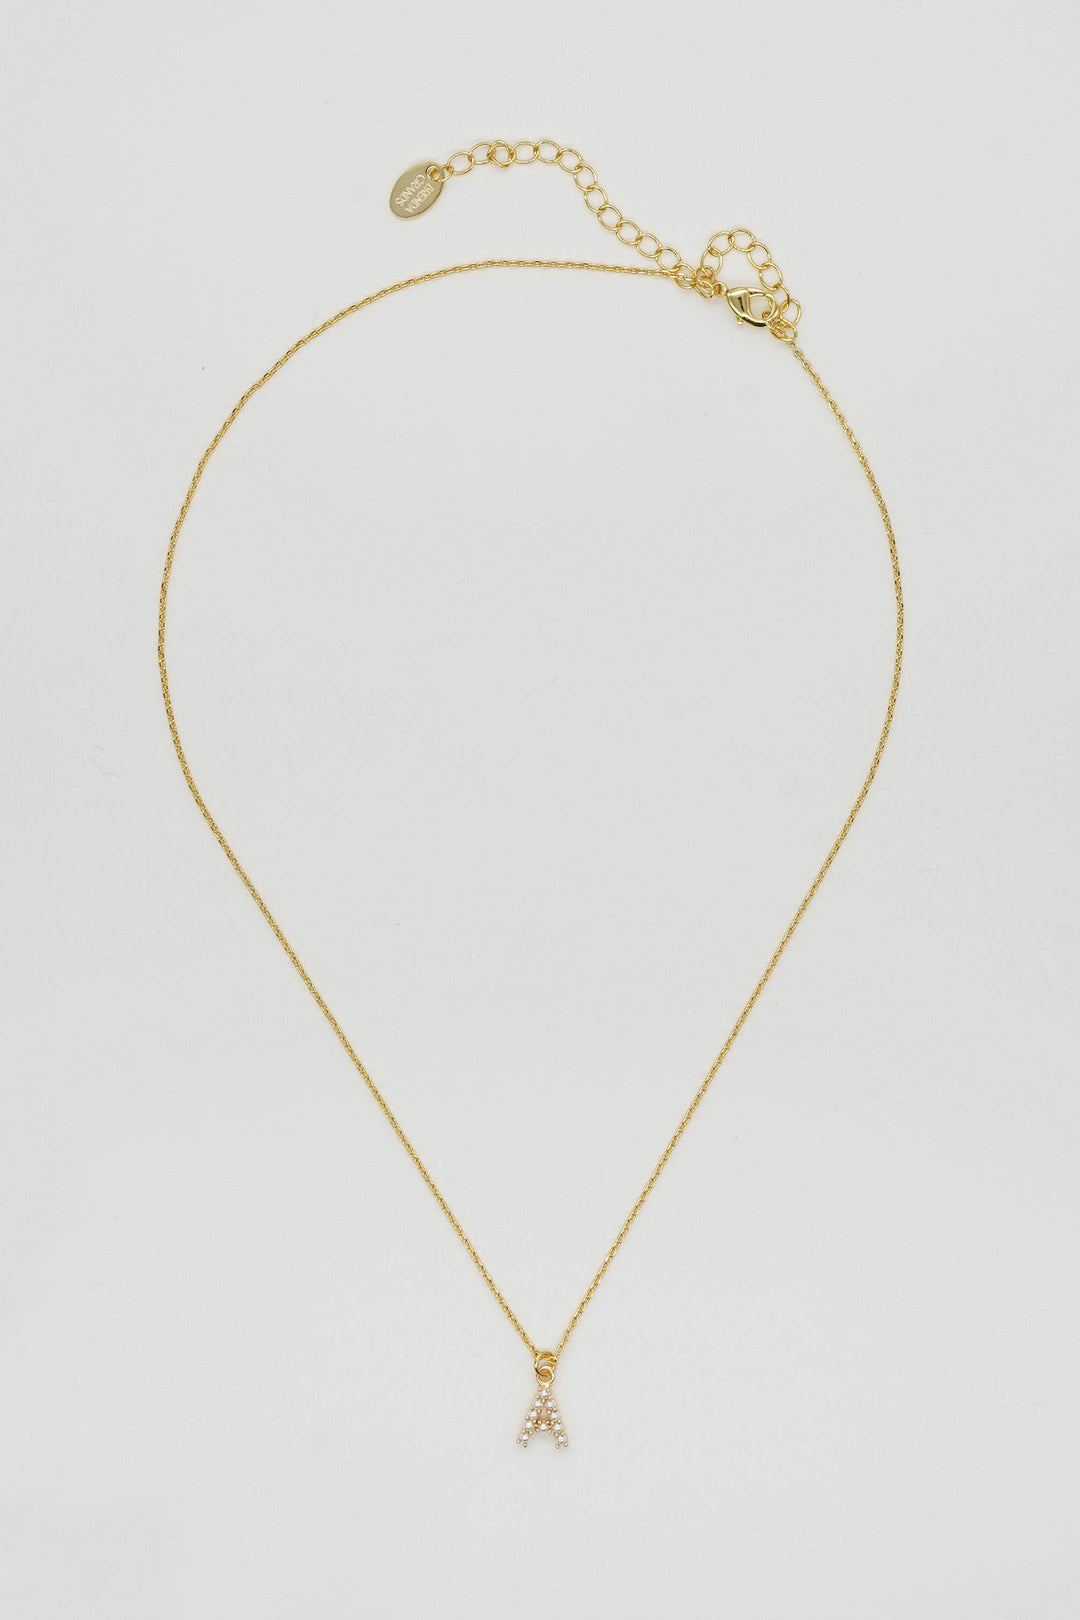 Dainty Love Pearl Initial Necklace: Holiday Favorite: F/ 15"+3"